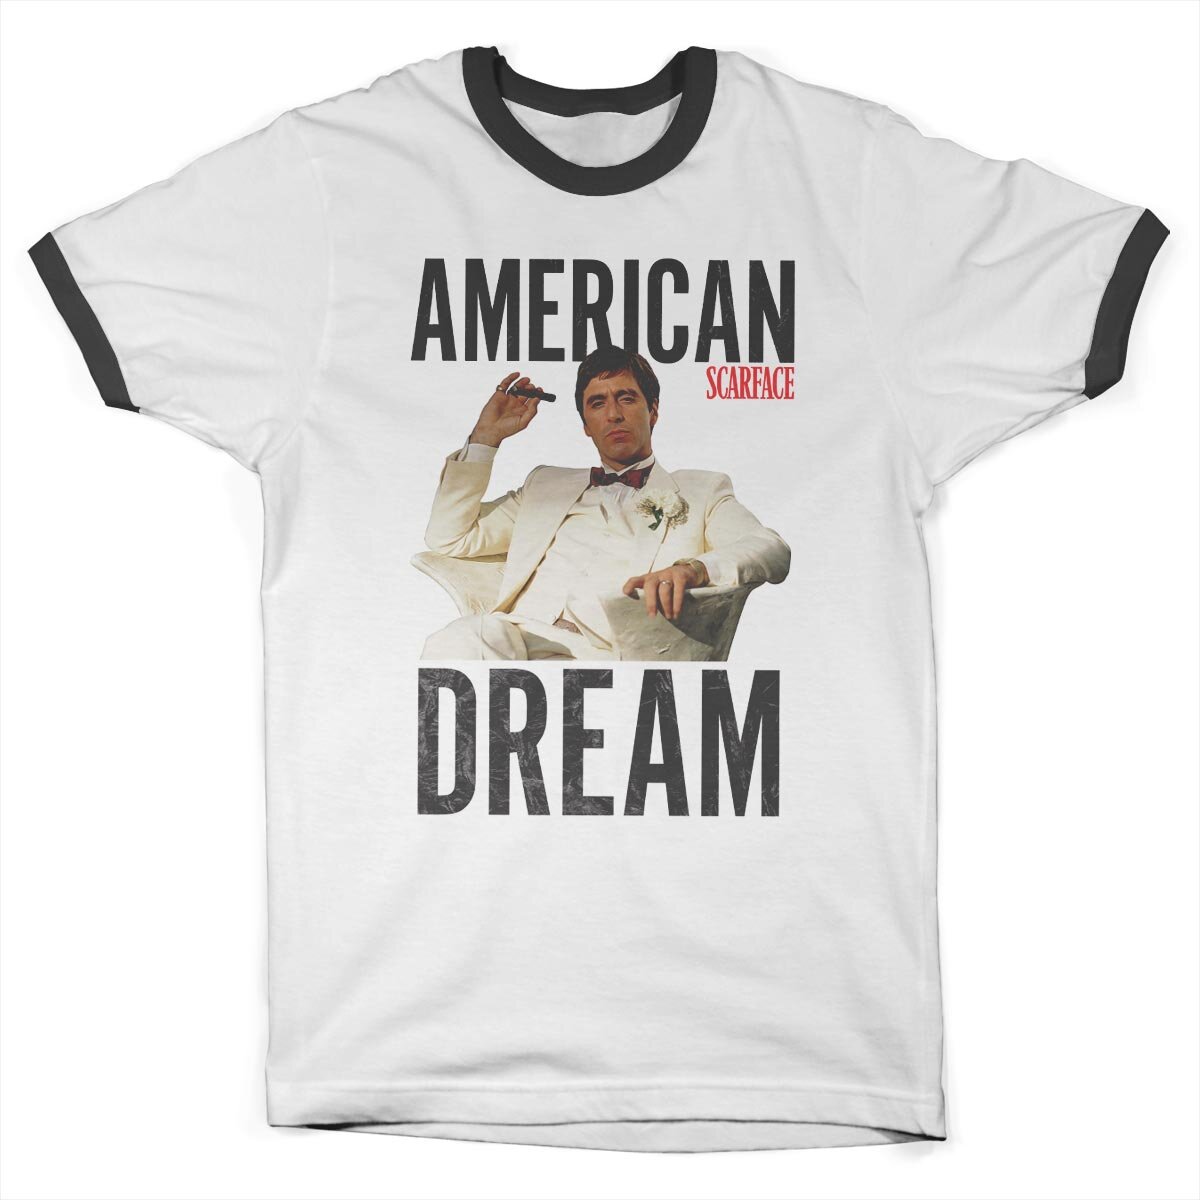 Scarface - American Dream Ringer Tee